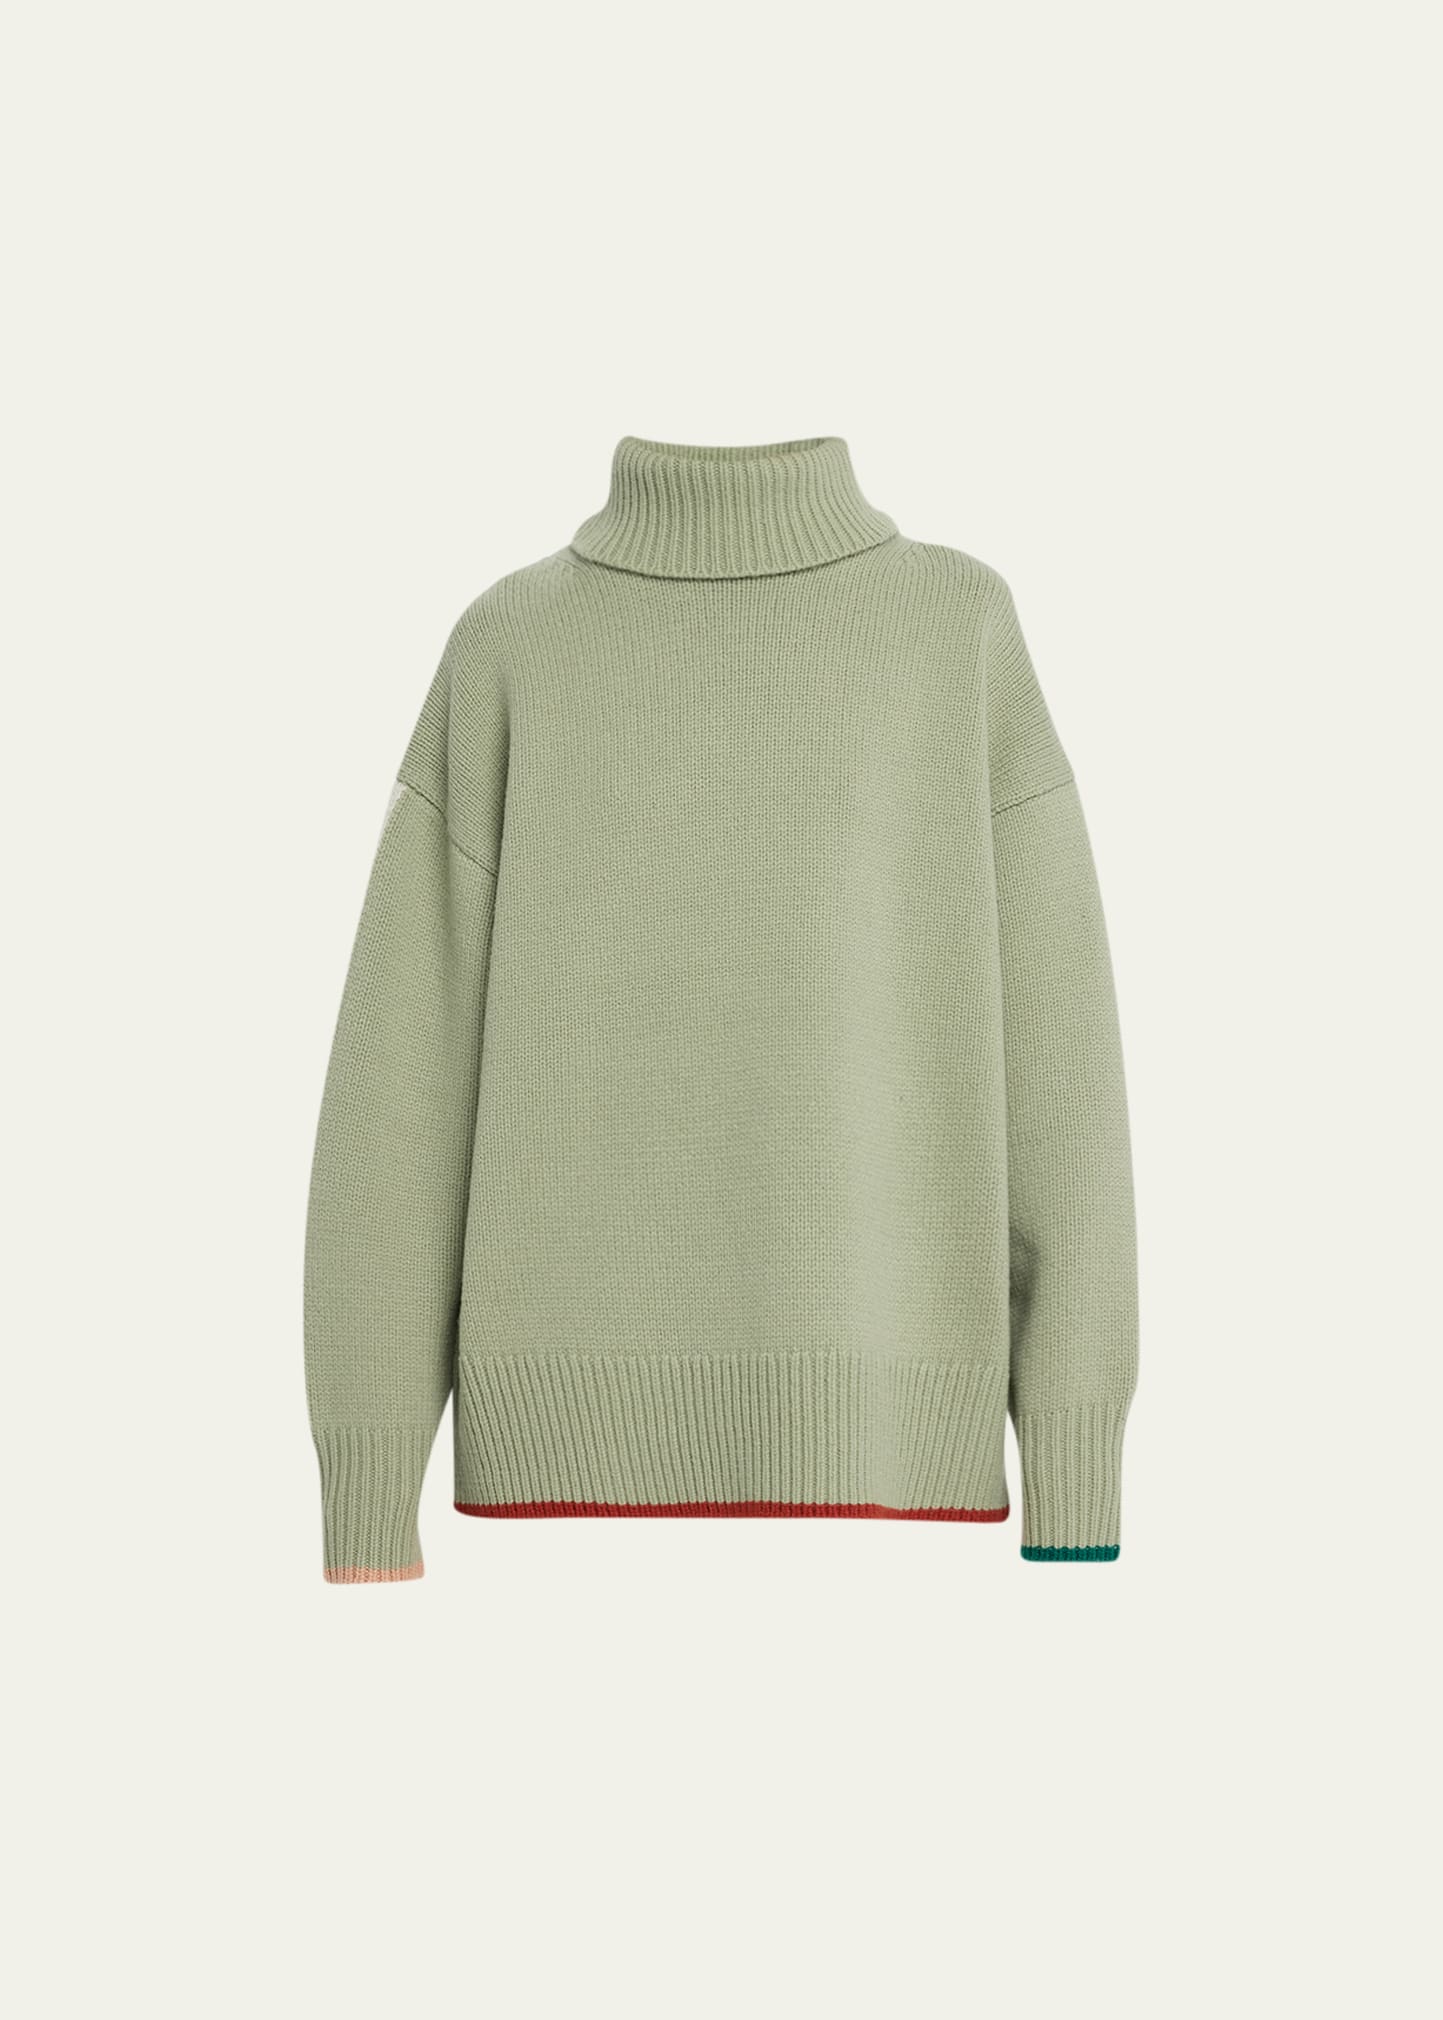 Zankov Paolo Oversized Turtleneck Wool Sweater With Colorblock Tipping In Sage Multi